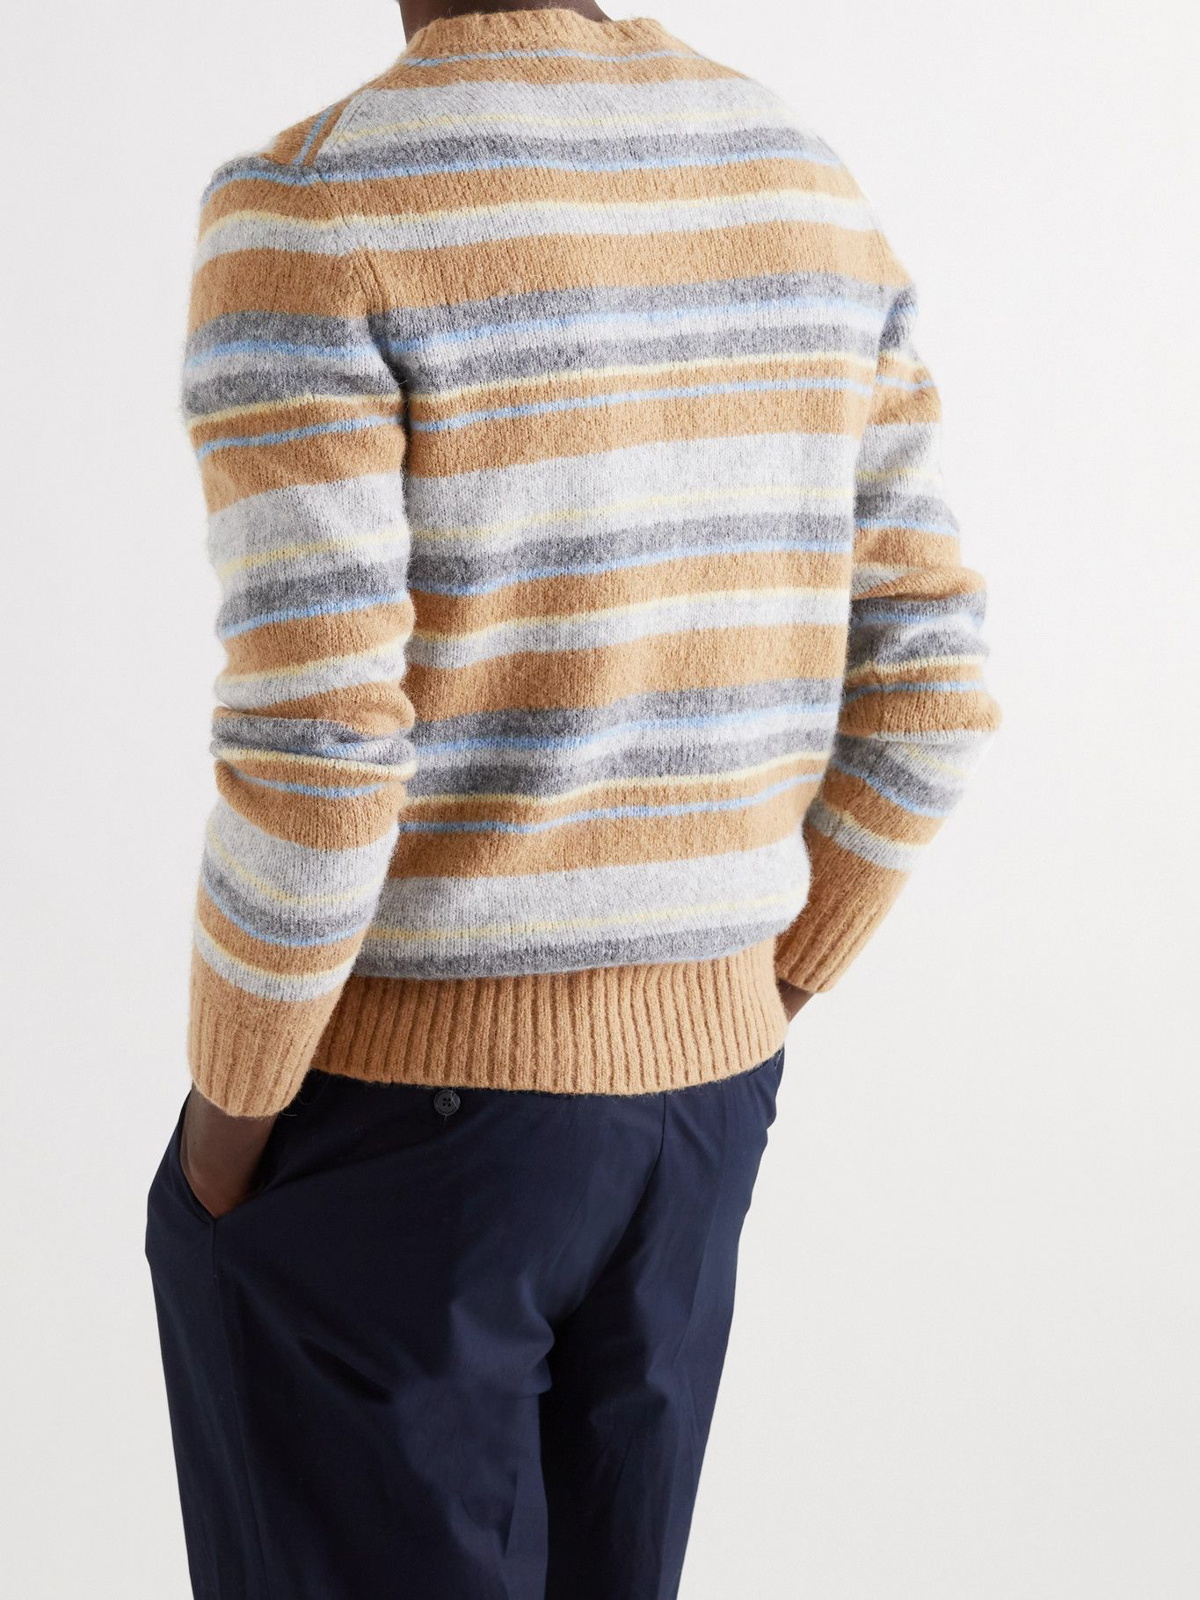 OFFICINE GÉNÉRALE - Marco Striped Knitted Sweater - Neutrals Officine ...